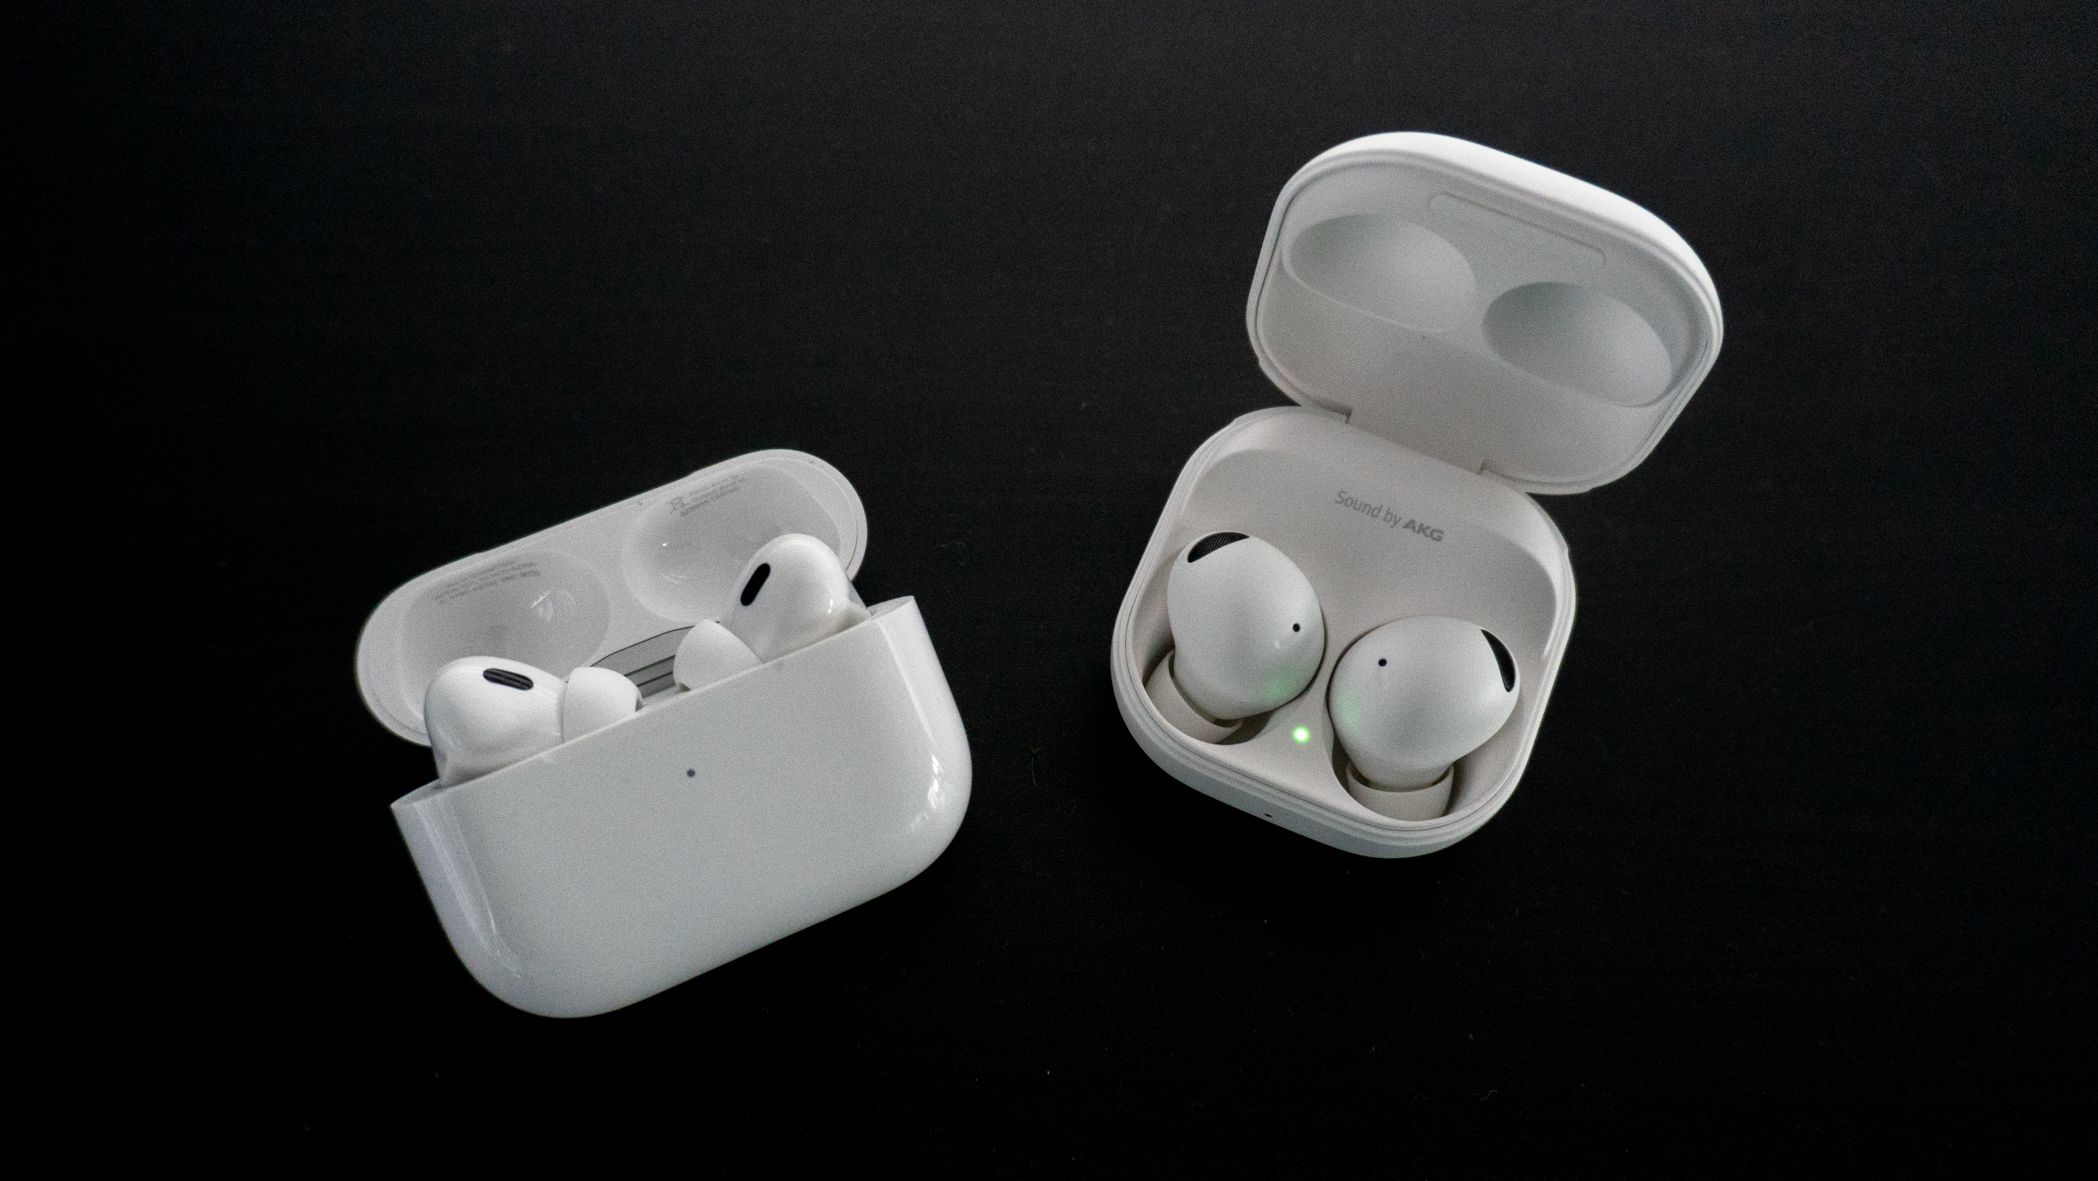 Samsung Galaxy Buds 2 Pro take the fight to Sony to be the king of ANC